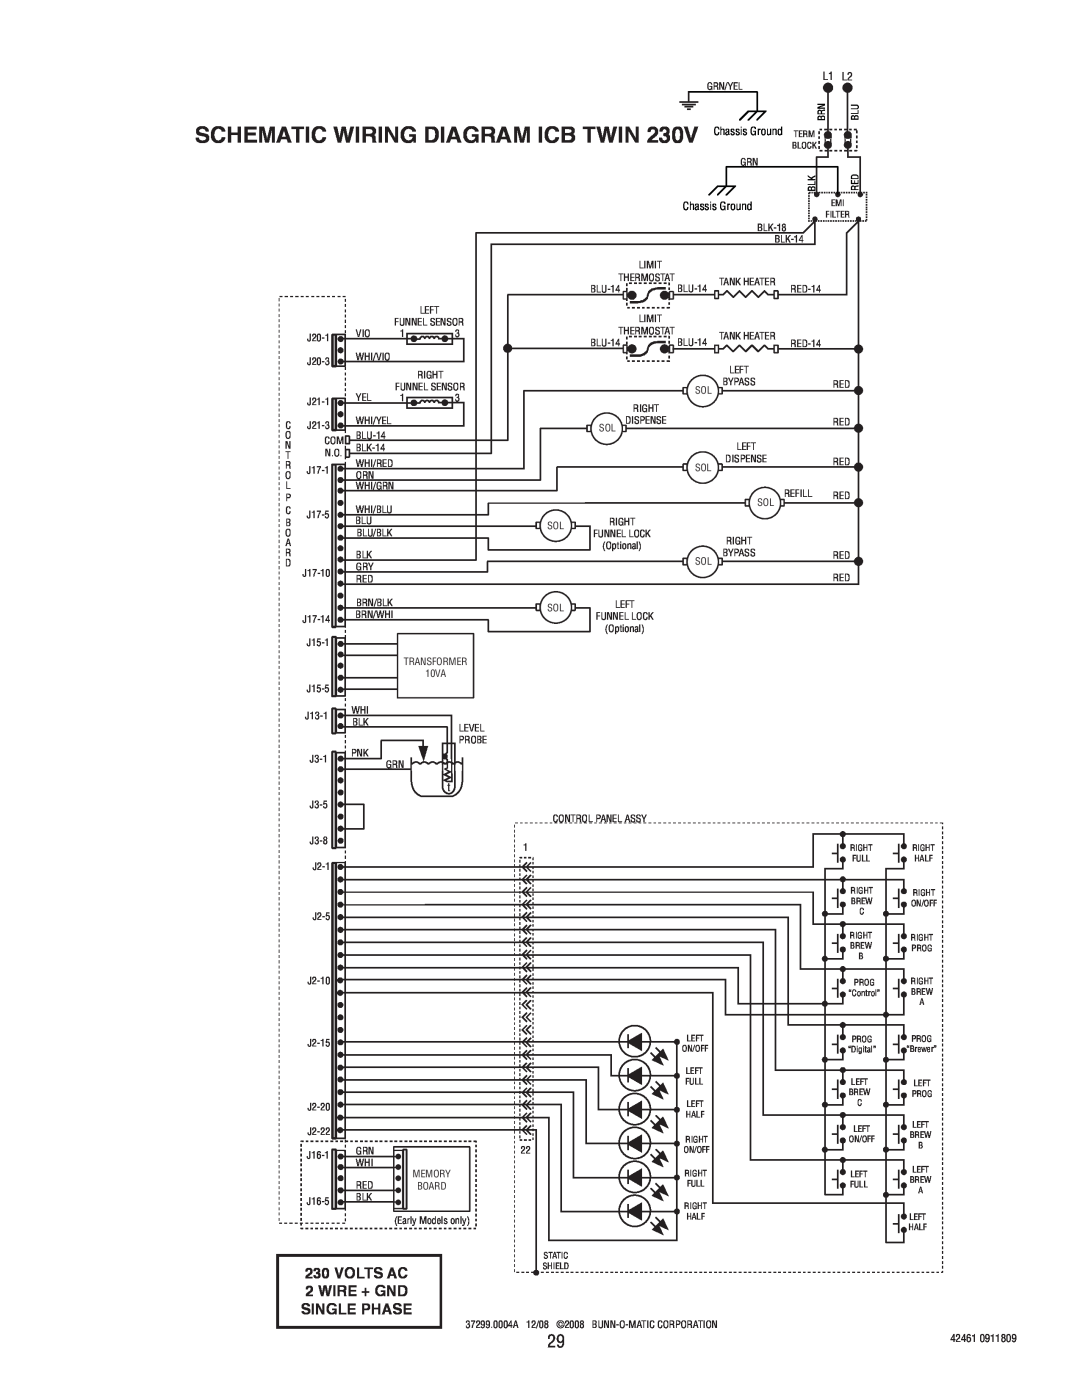 Bunn ITB/ITCB, ICB/TWIN manual SCHEMATIC WIRING DIAGRAM ICB TWIN 230V Chassis Ground TERM, Volts Ac, Wire + Gnd Single Phase 